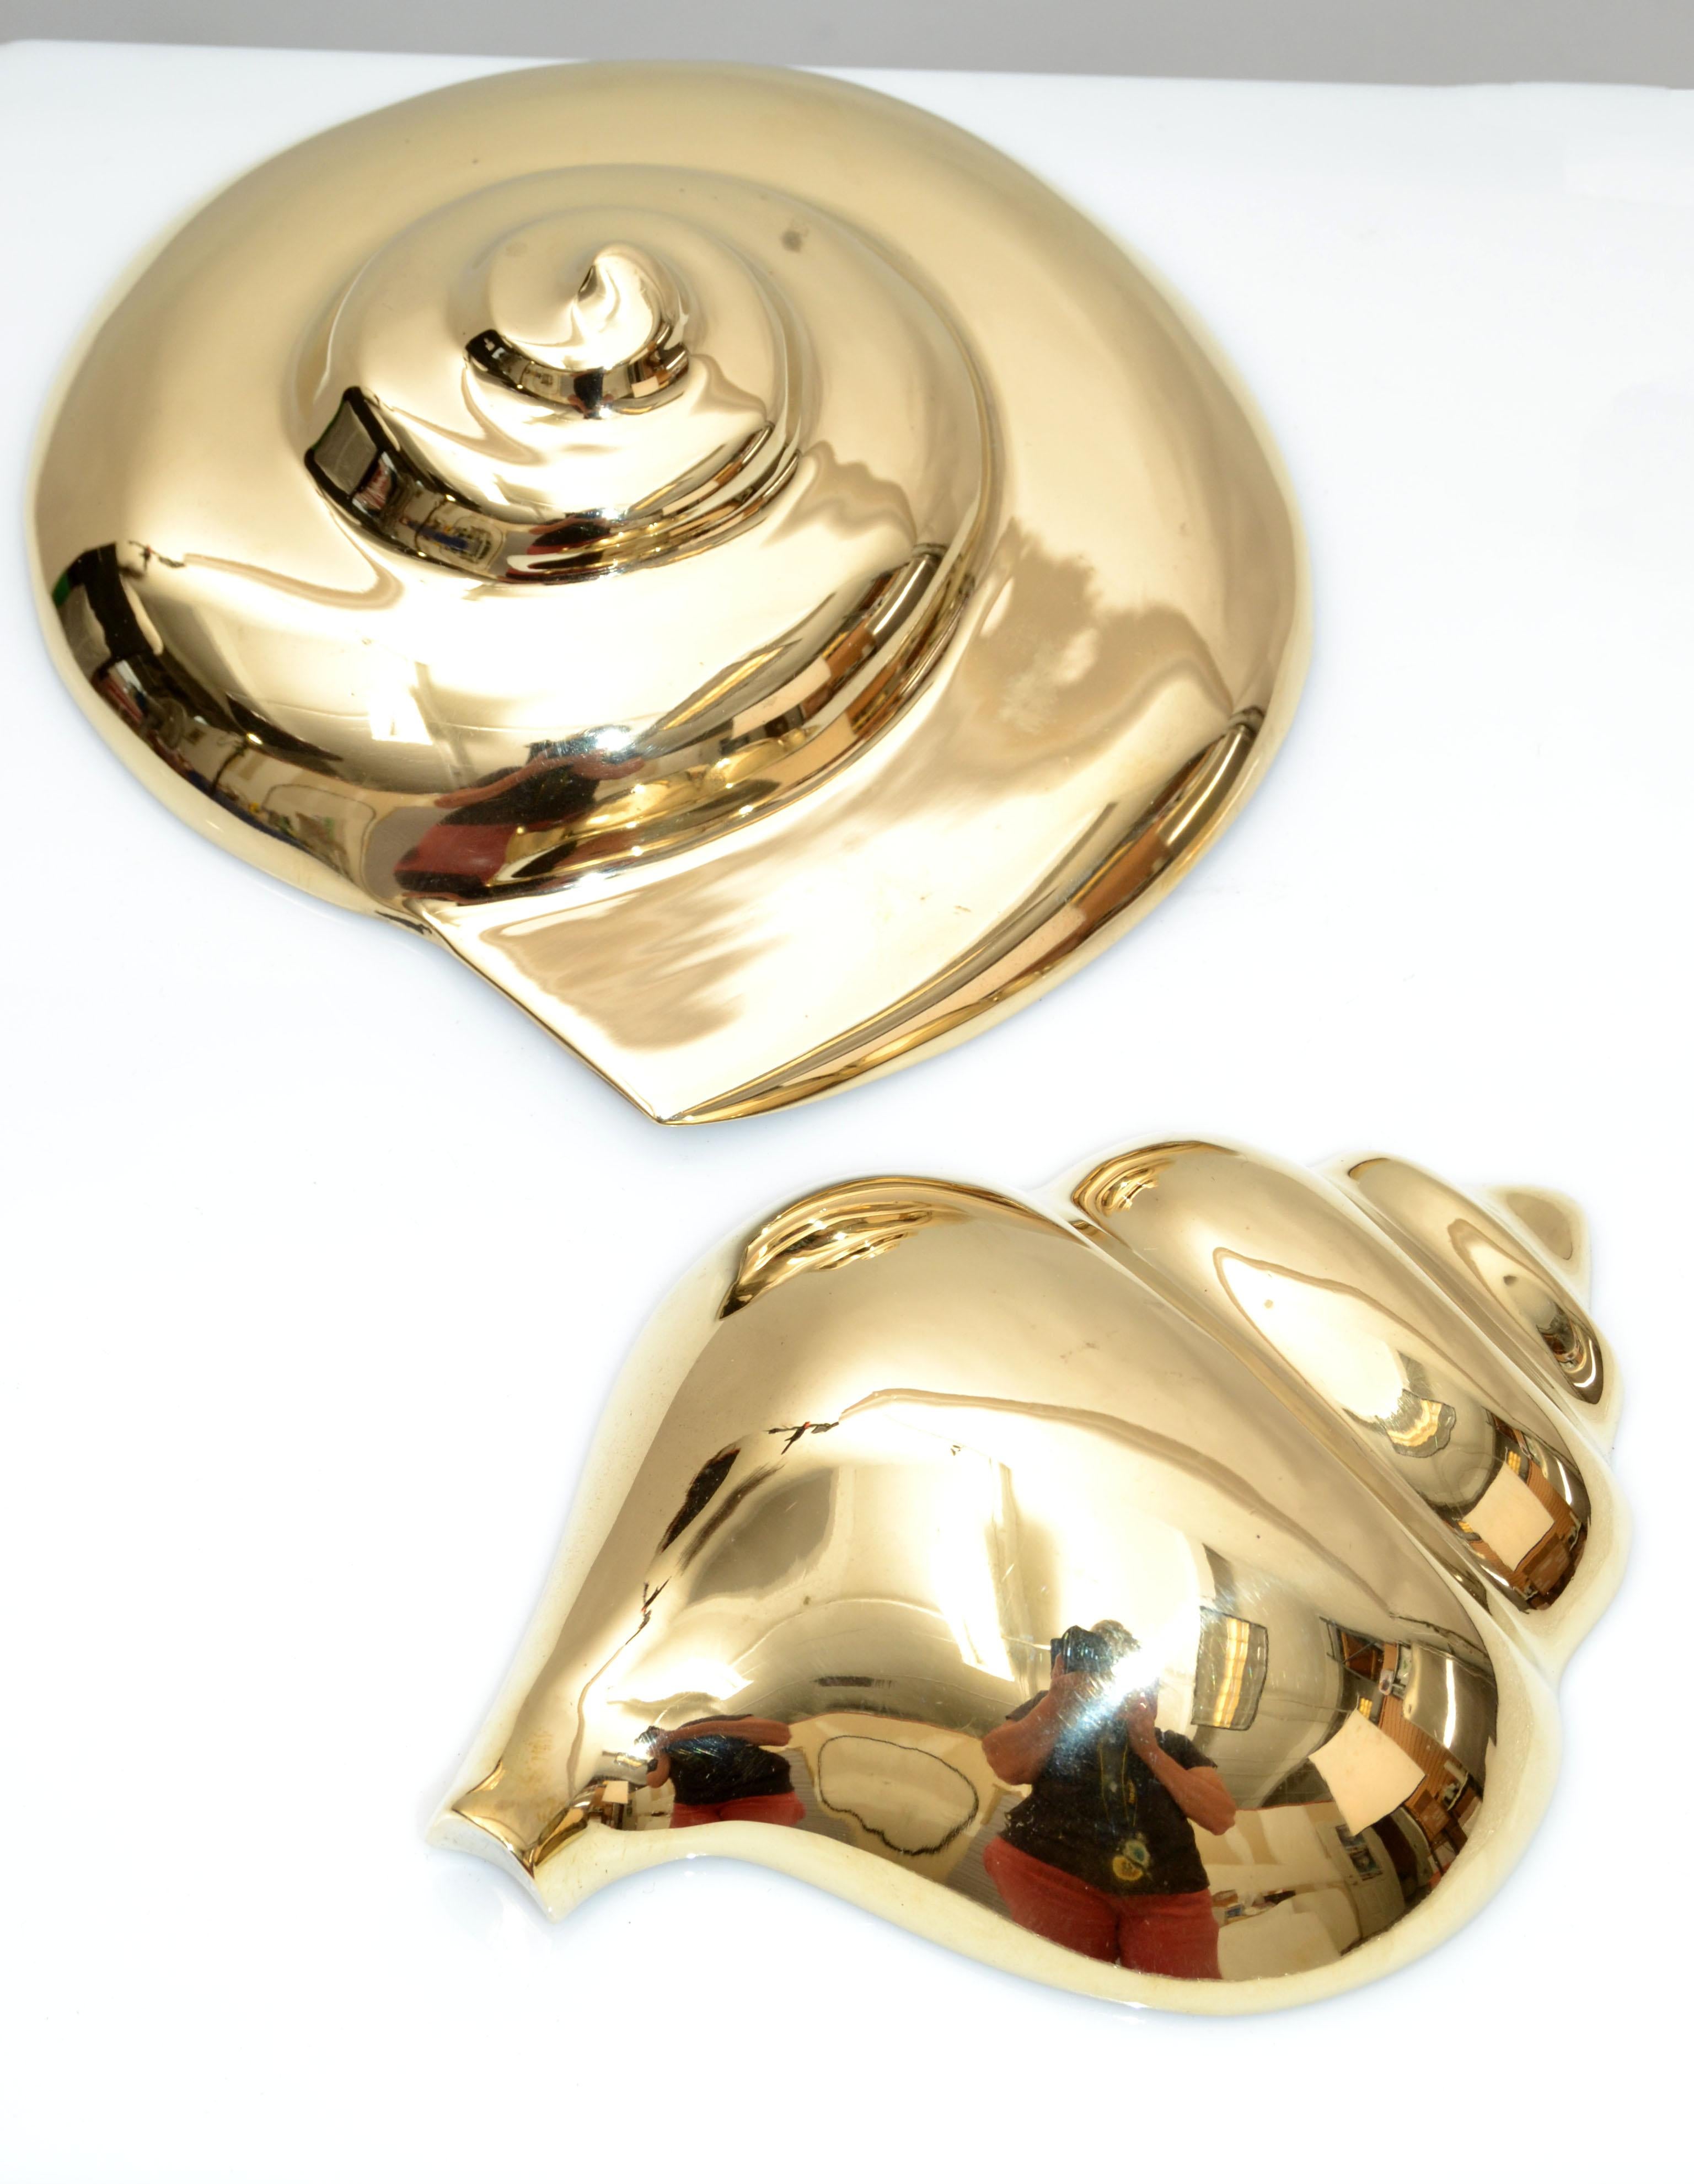 Mid-Century Modern 2 Pieces Nautical polished brass seashell sculptures wall art. 
Have a Hook in the reverse for secure hanging.
Round Shell measures: Height: 3 inches x 6.75 inches Diameter.